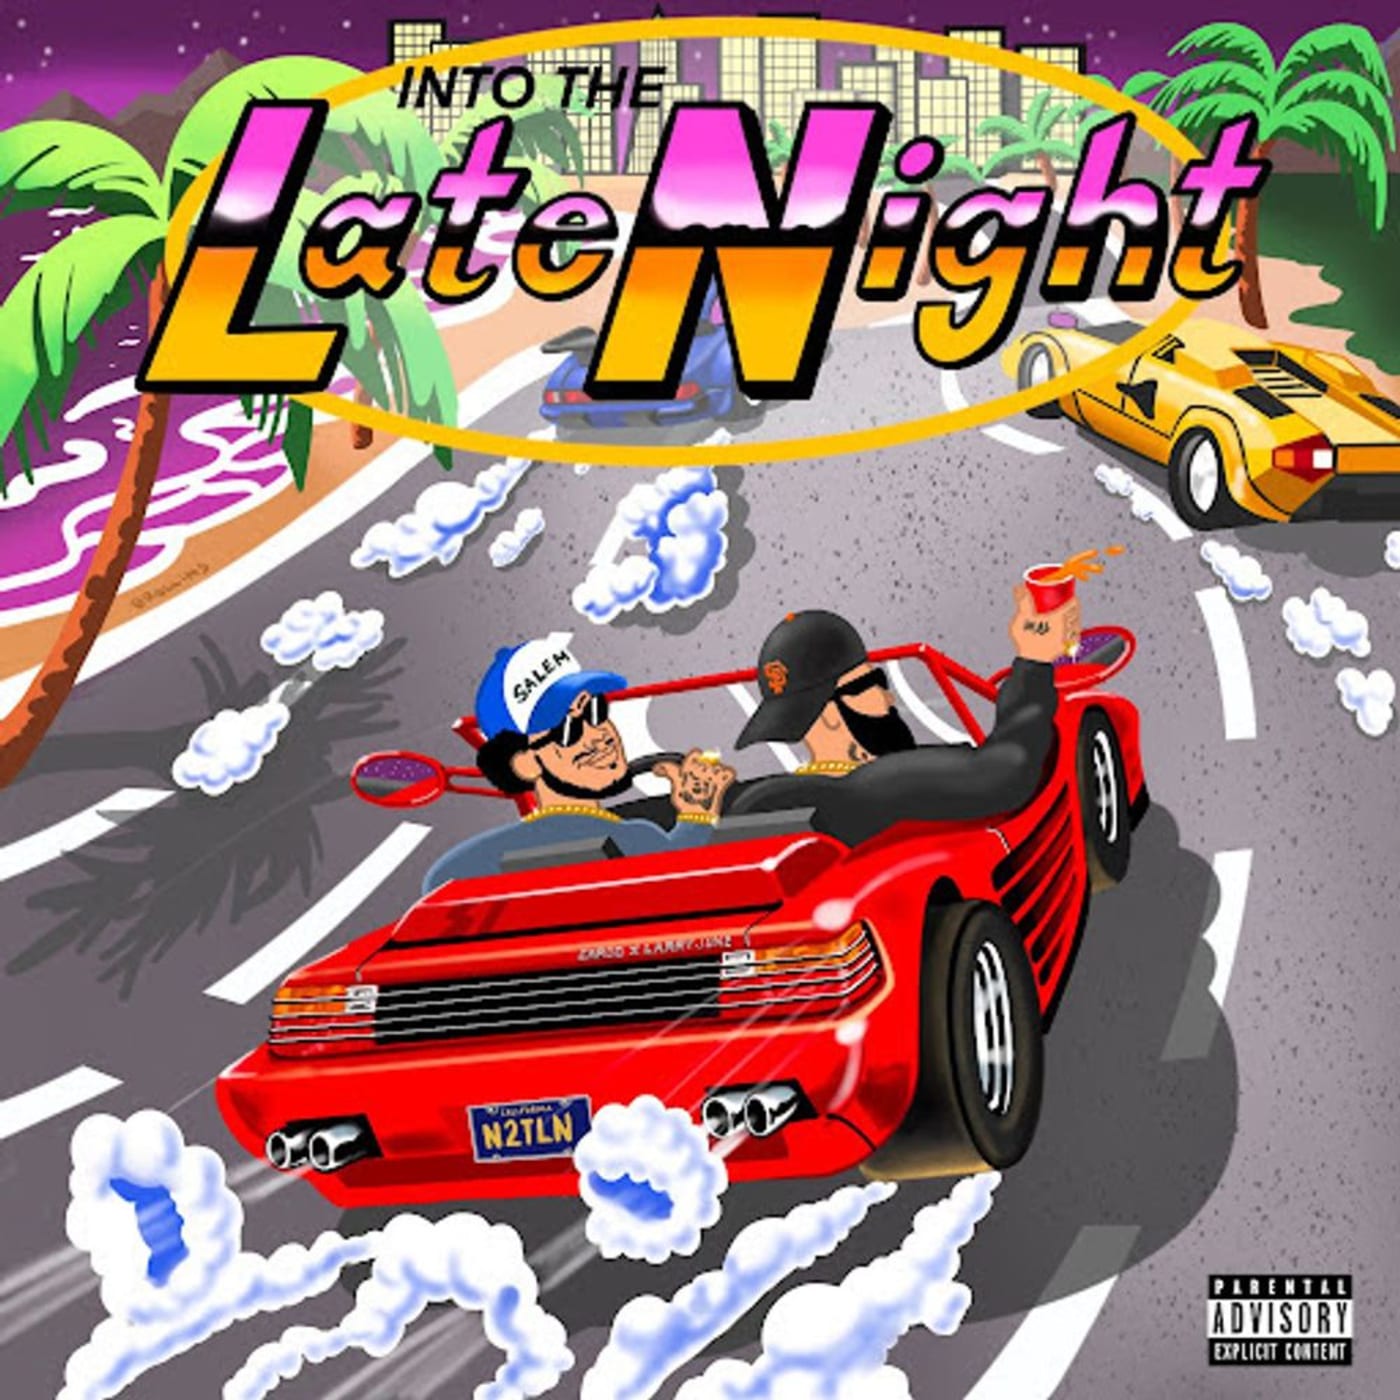 Listen to Larry June & Cardo's New Mixtape 'Into the Late Night'